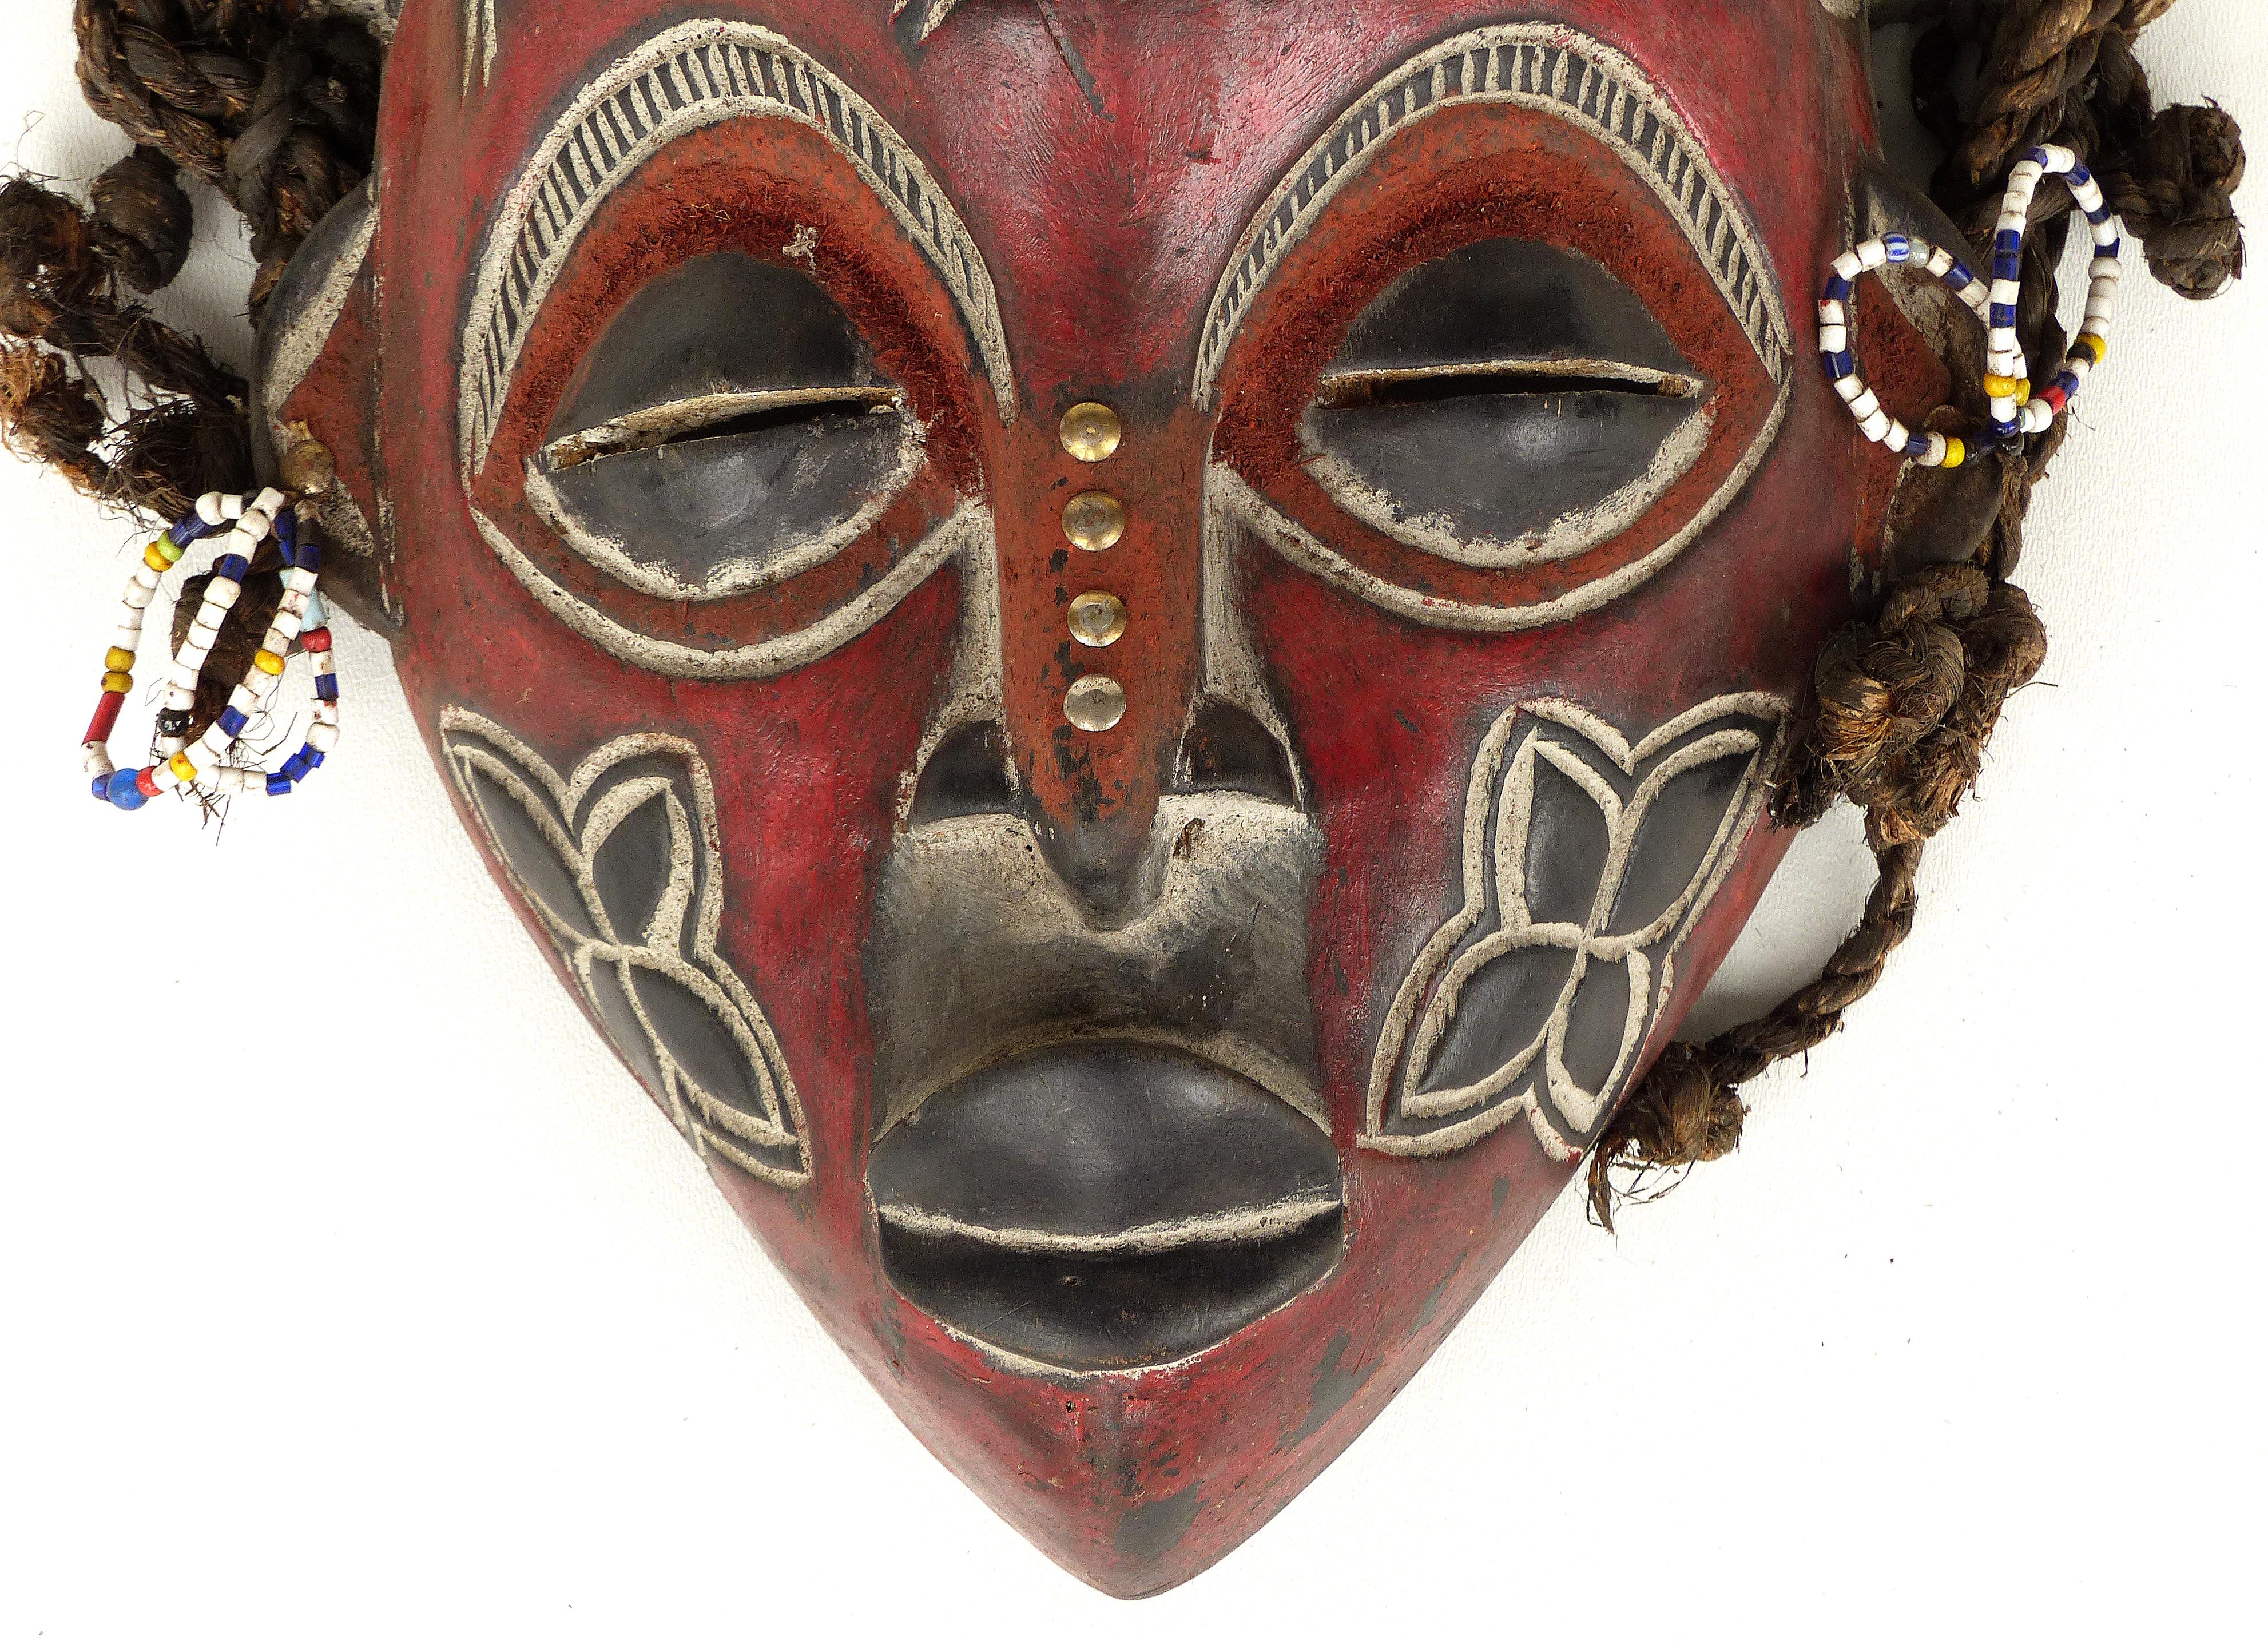 Cameroonian Cameroon Bamileke Tribal Carved Horned Mask Embellished with Sea Beans & Beads